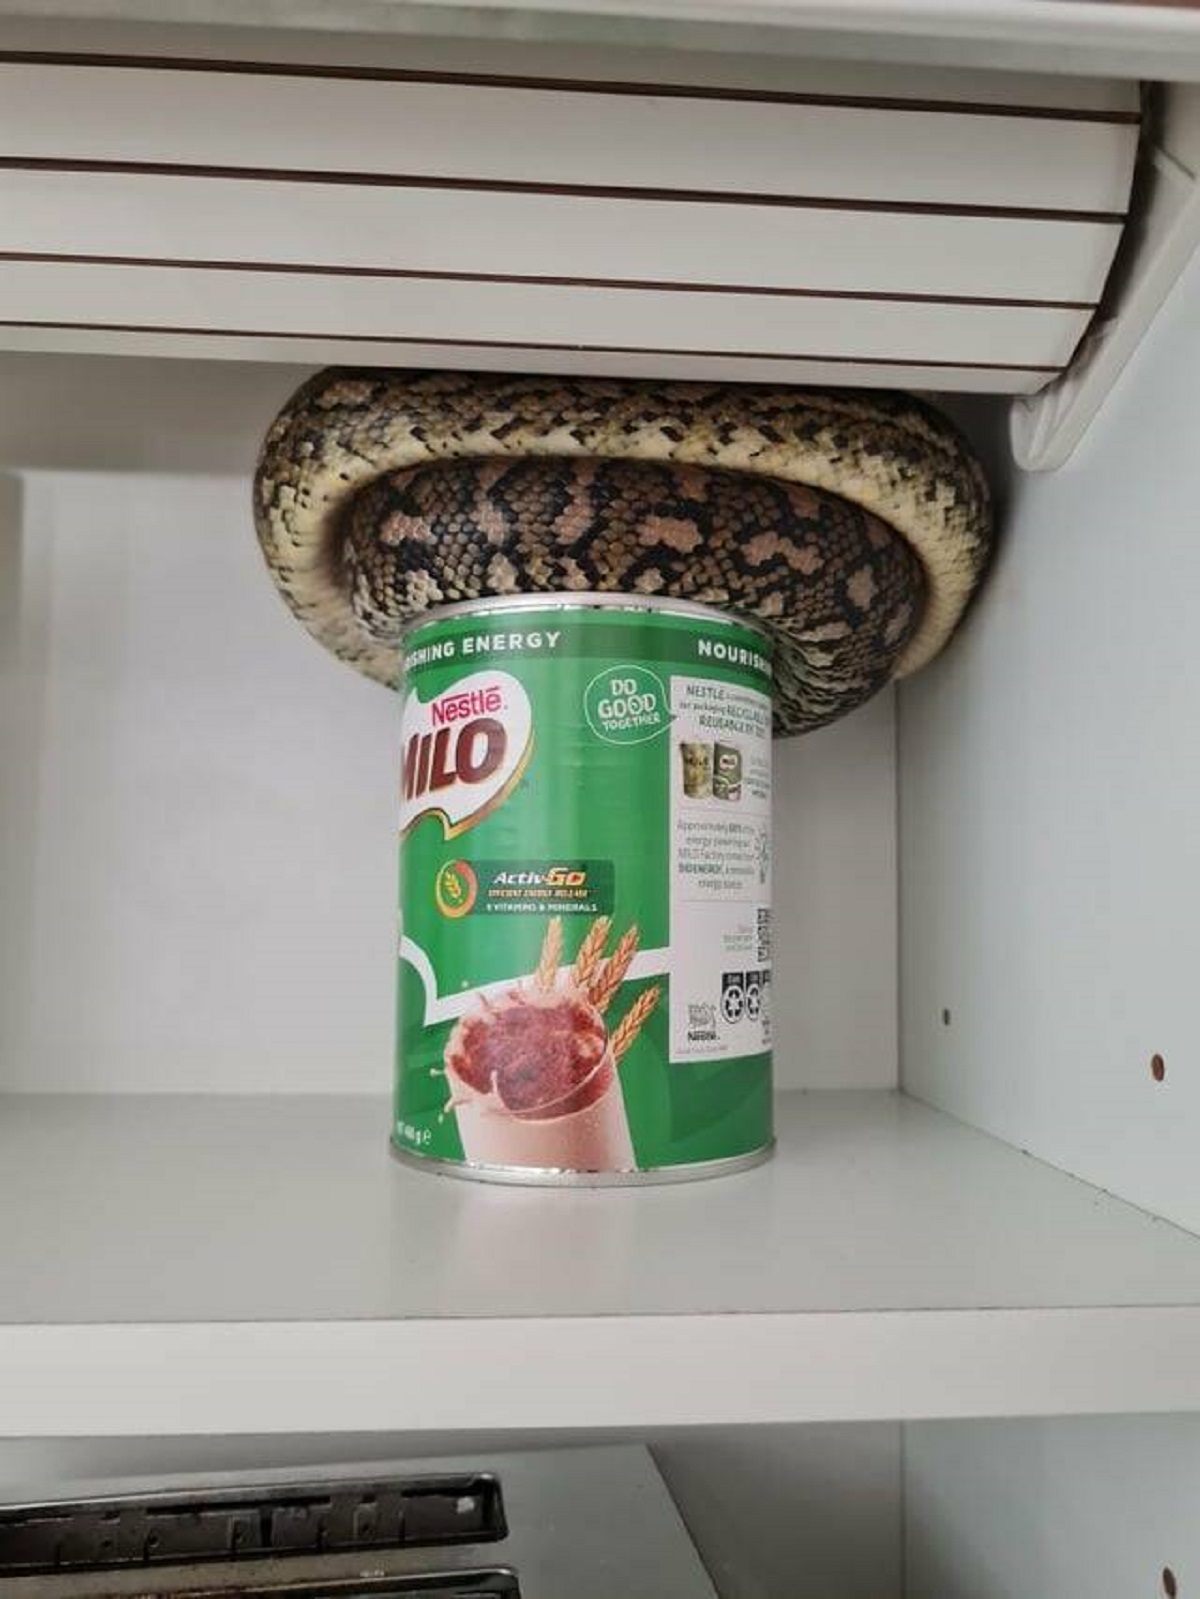 "This carpet snake is curled up and balancing on this tin of Milo"